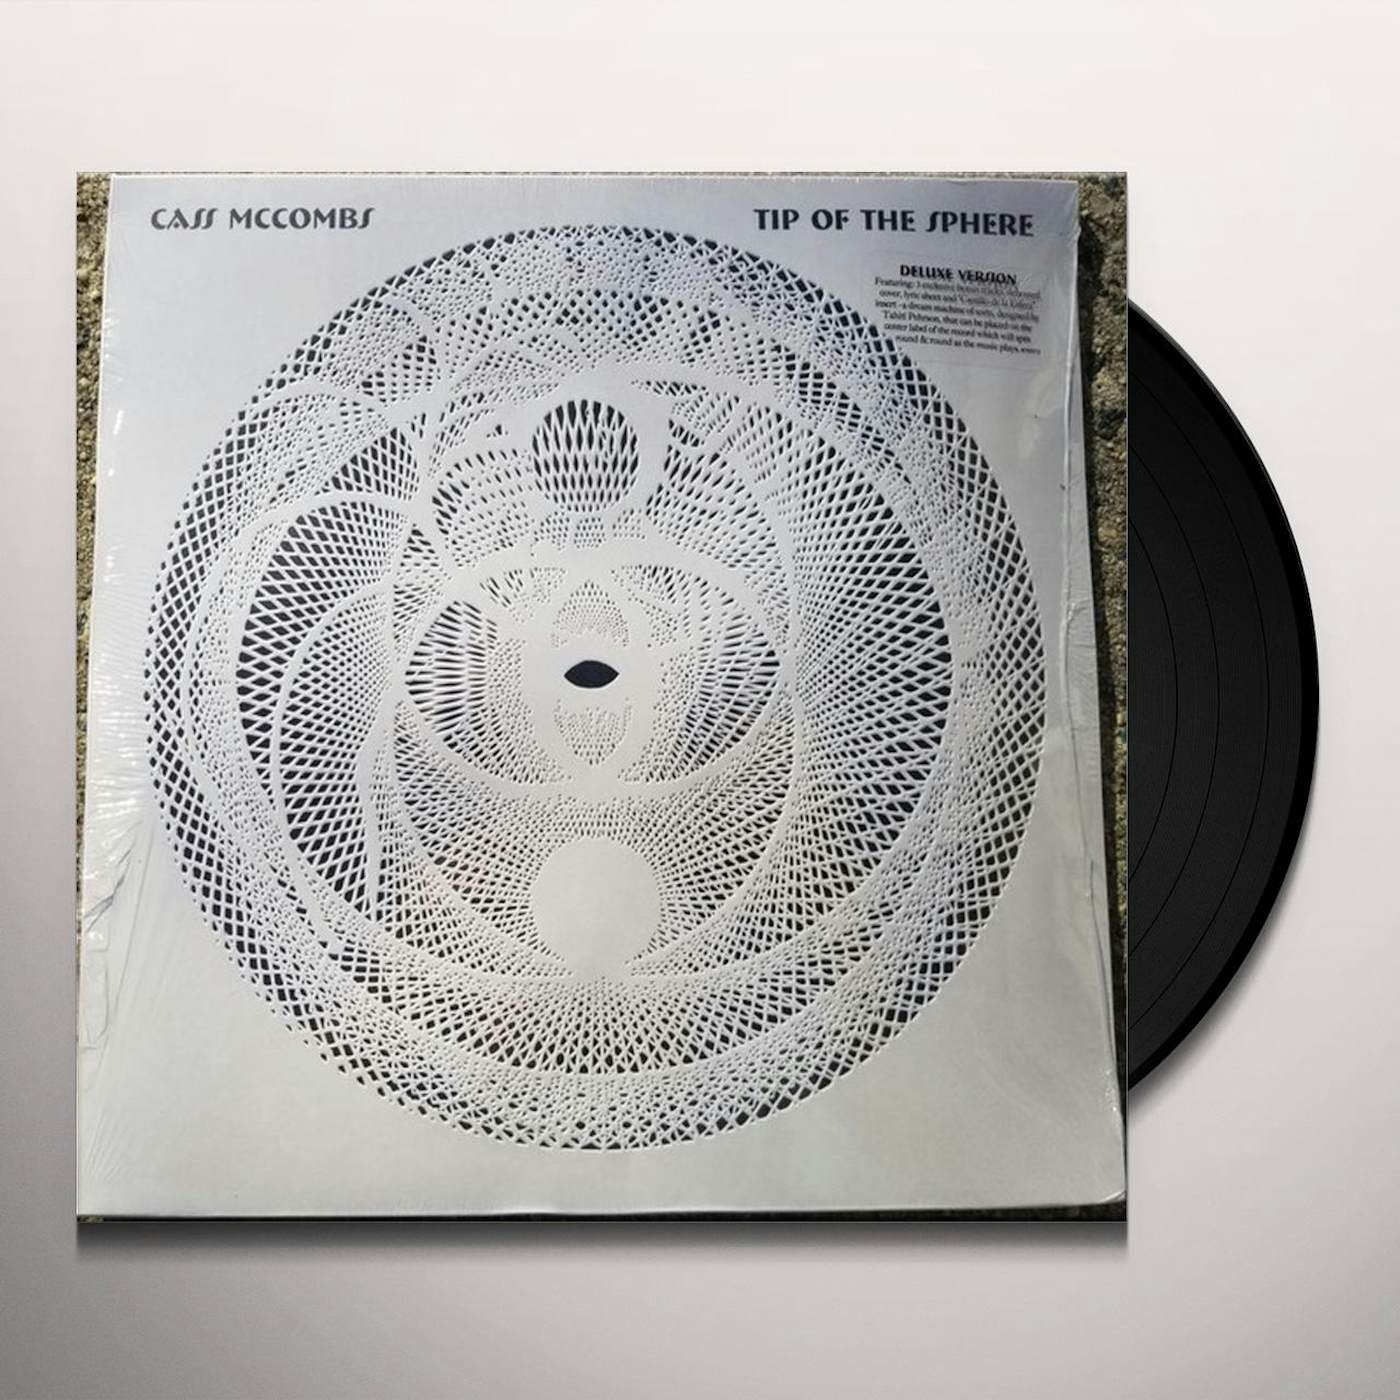 Cass McCombs TIP OF THE SPHERE (DELUXE) Vinyl Record